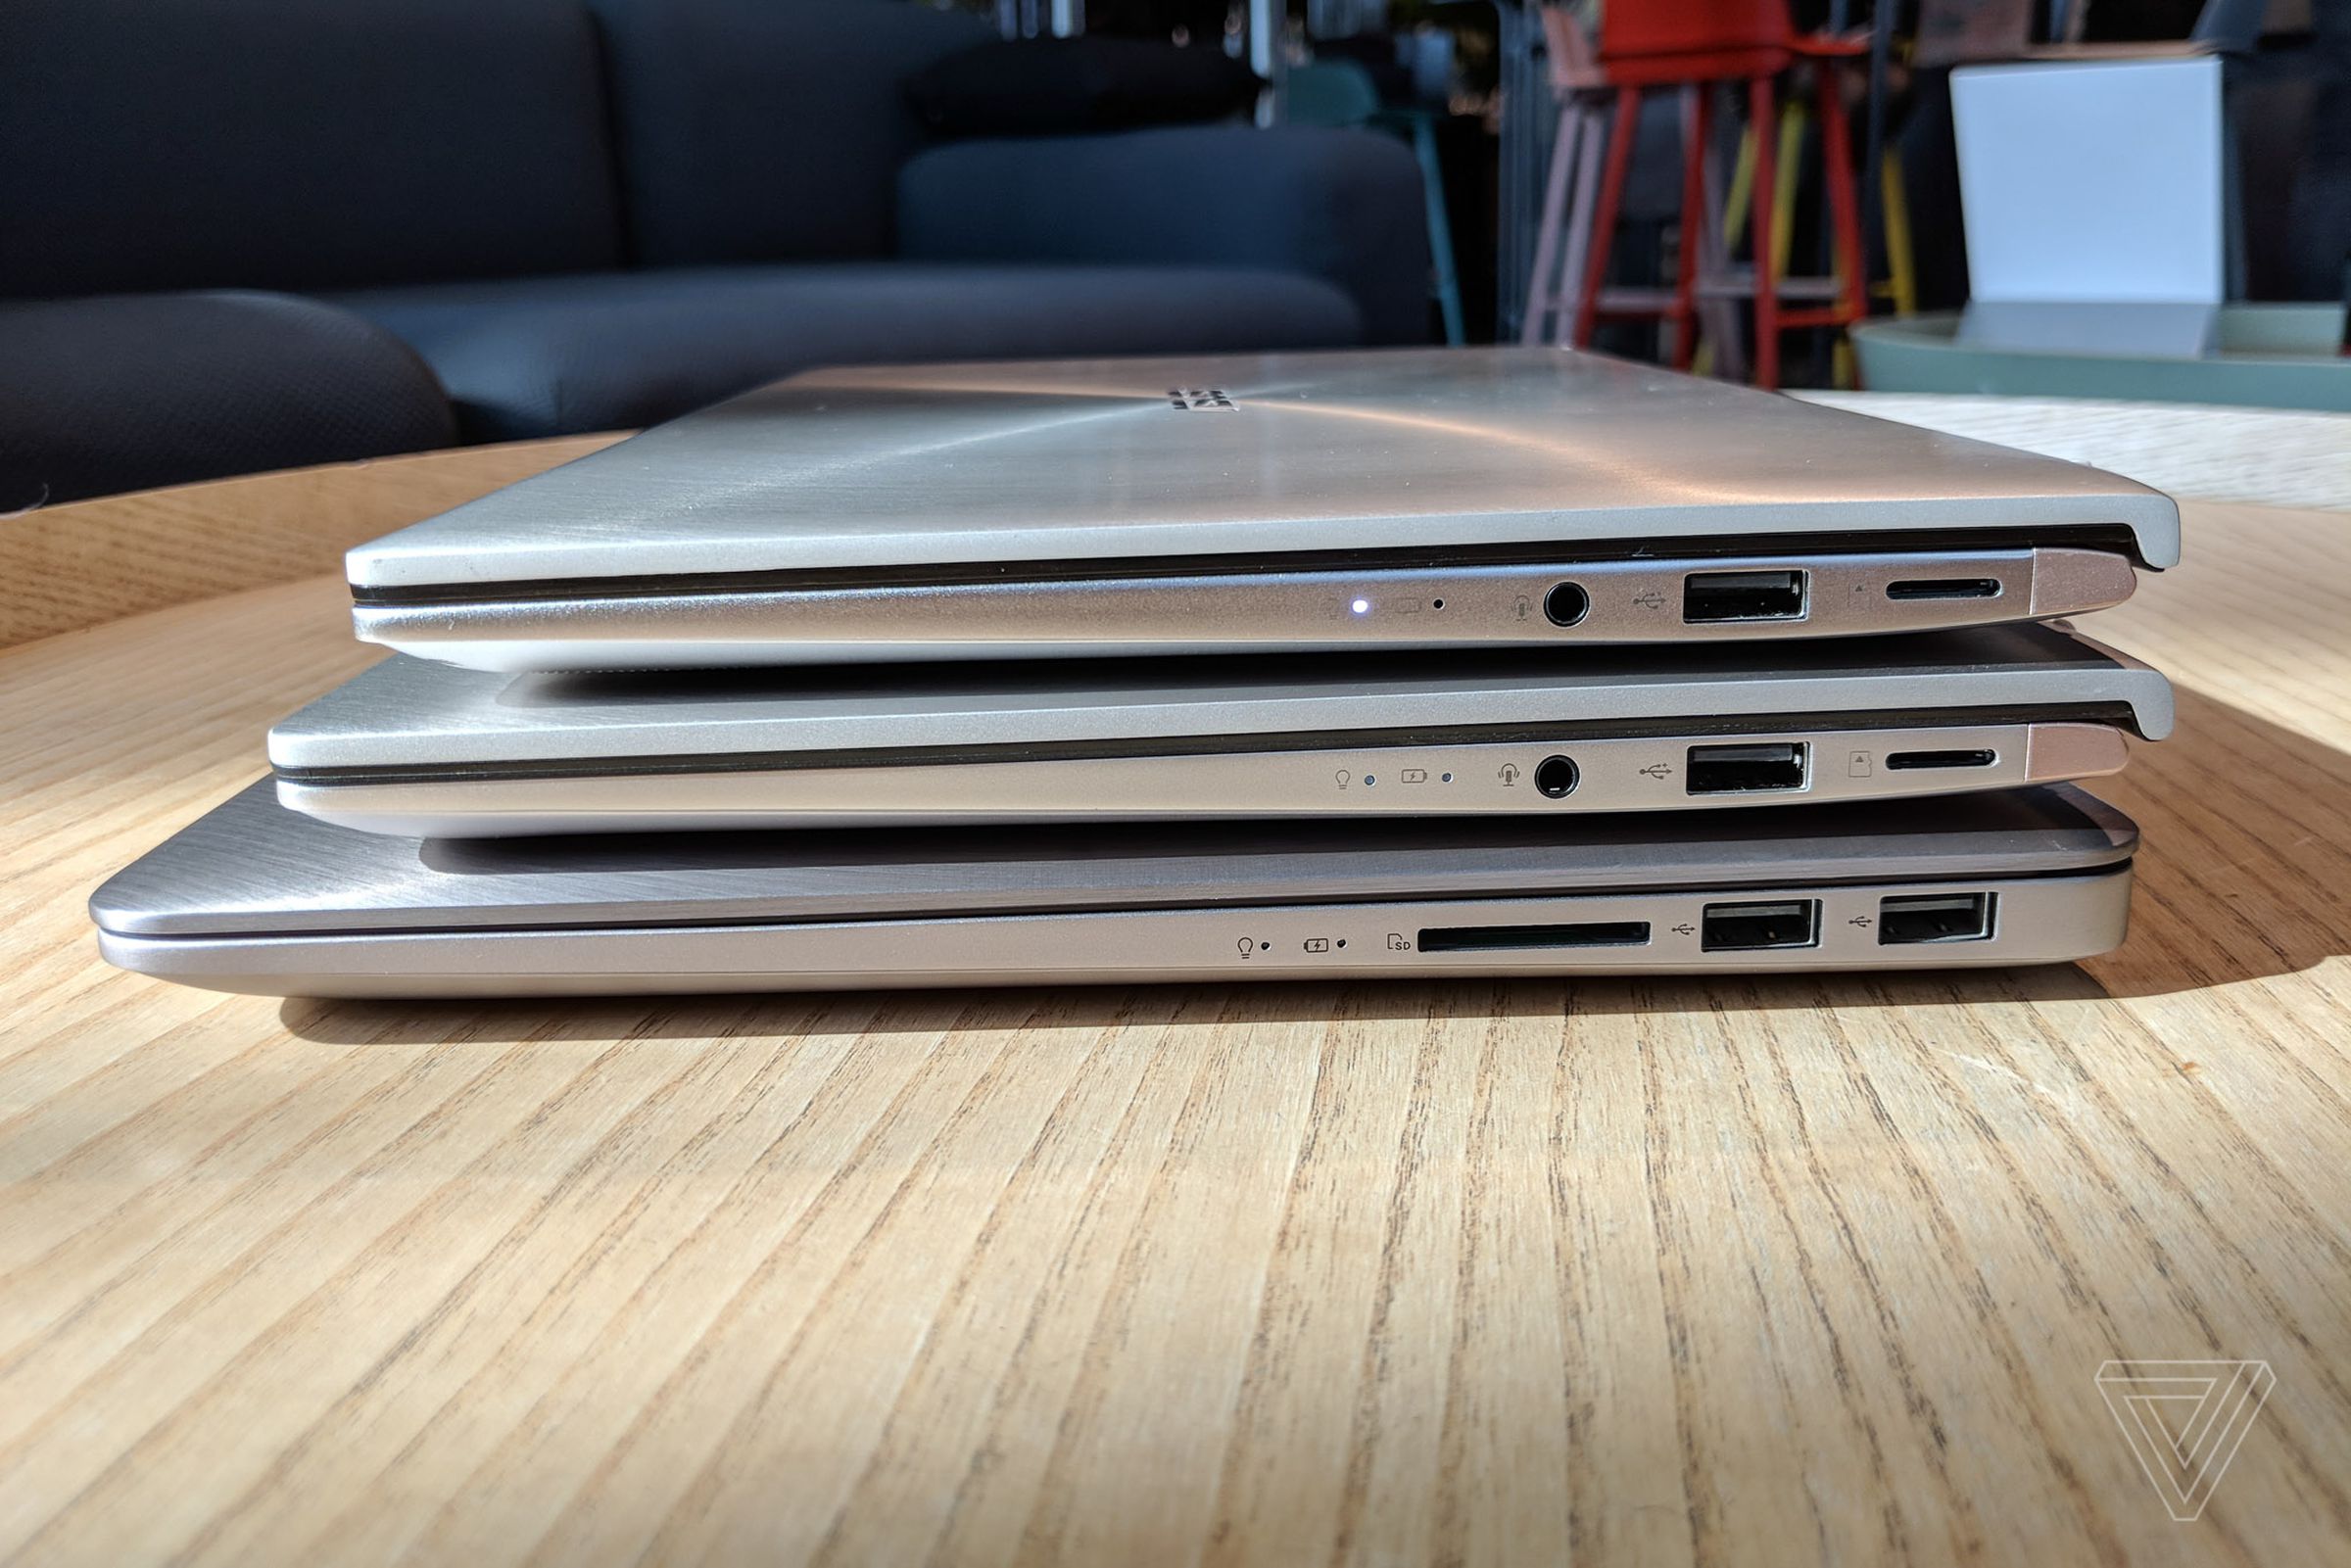 The new ZenBook 13 and 14 stacked atop last year’s ZenBook 13.